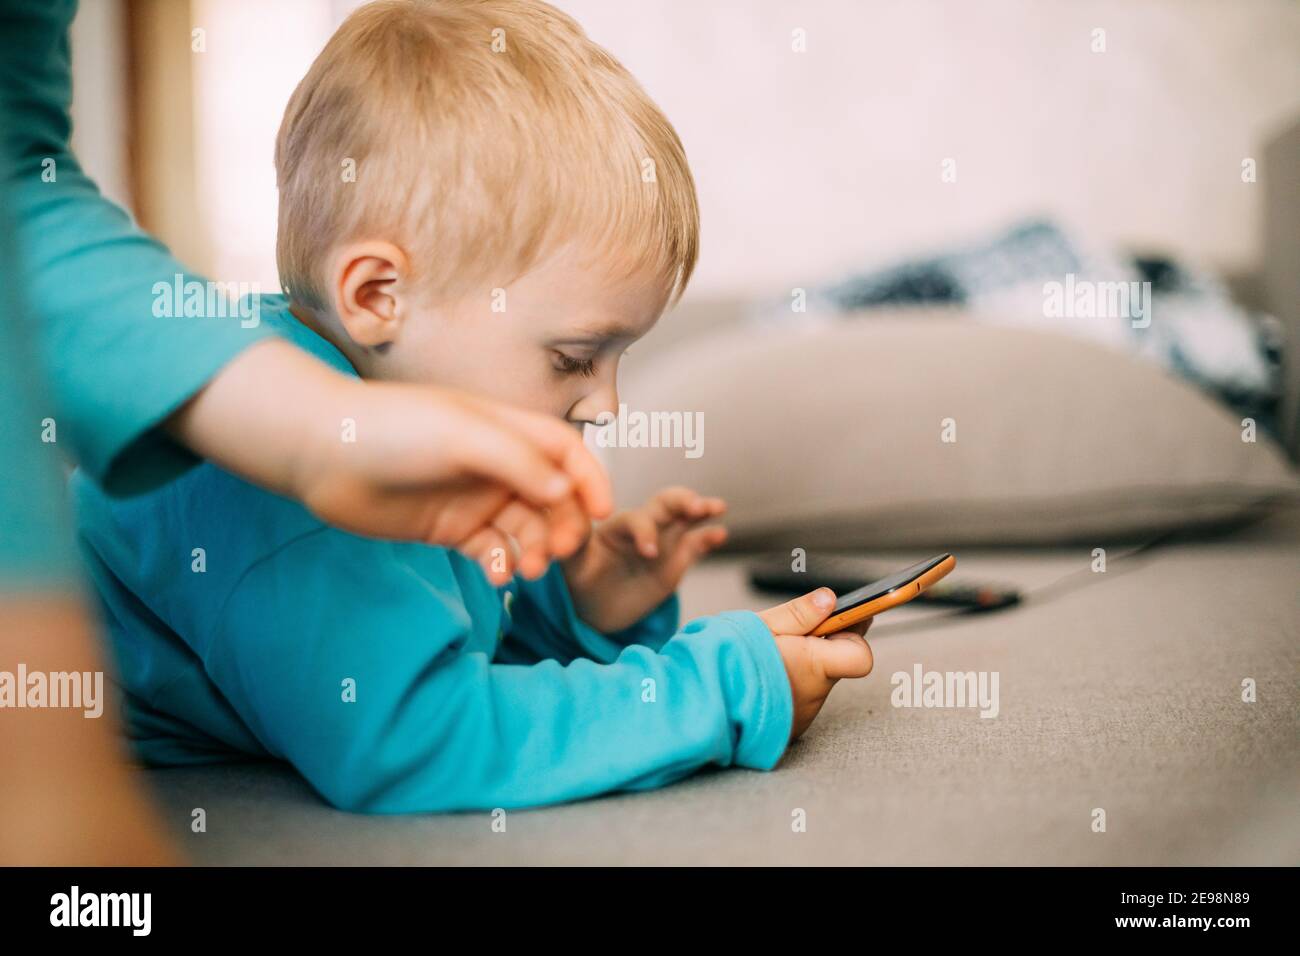 Little Caucasian Boy Playing Games On Phone Thoughtfully Stock Photo